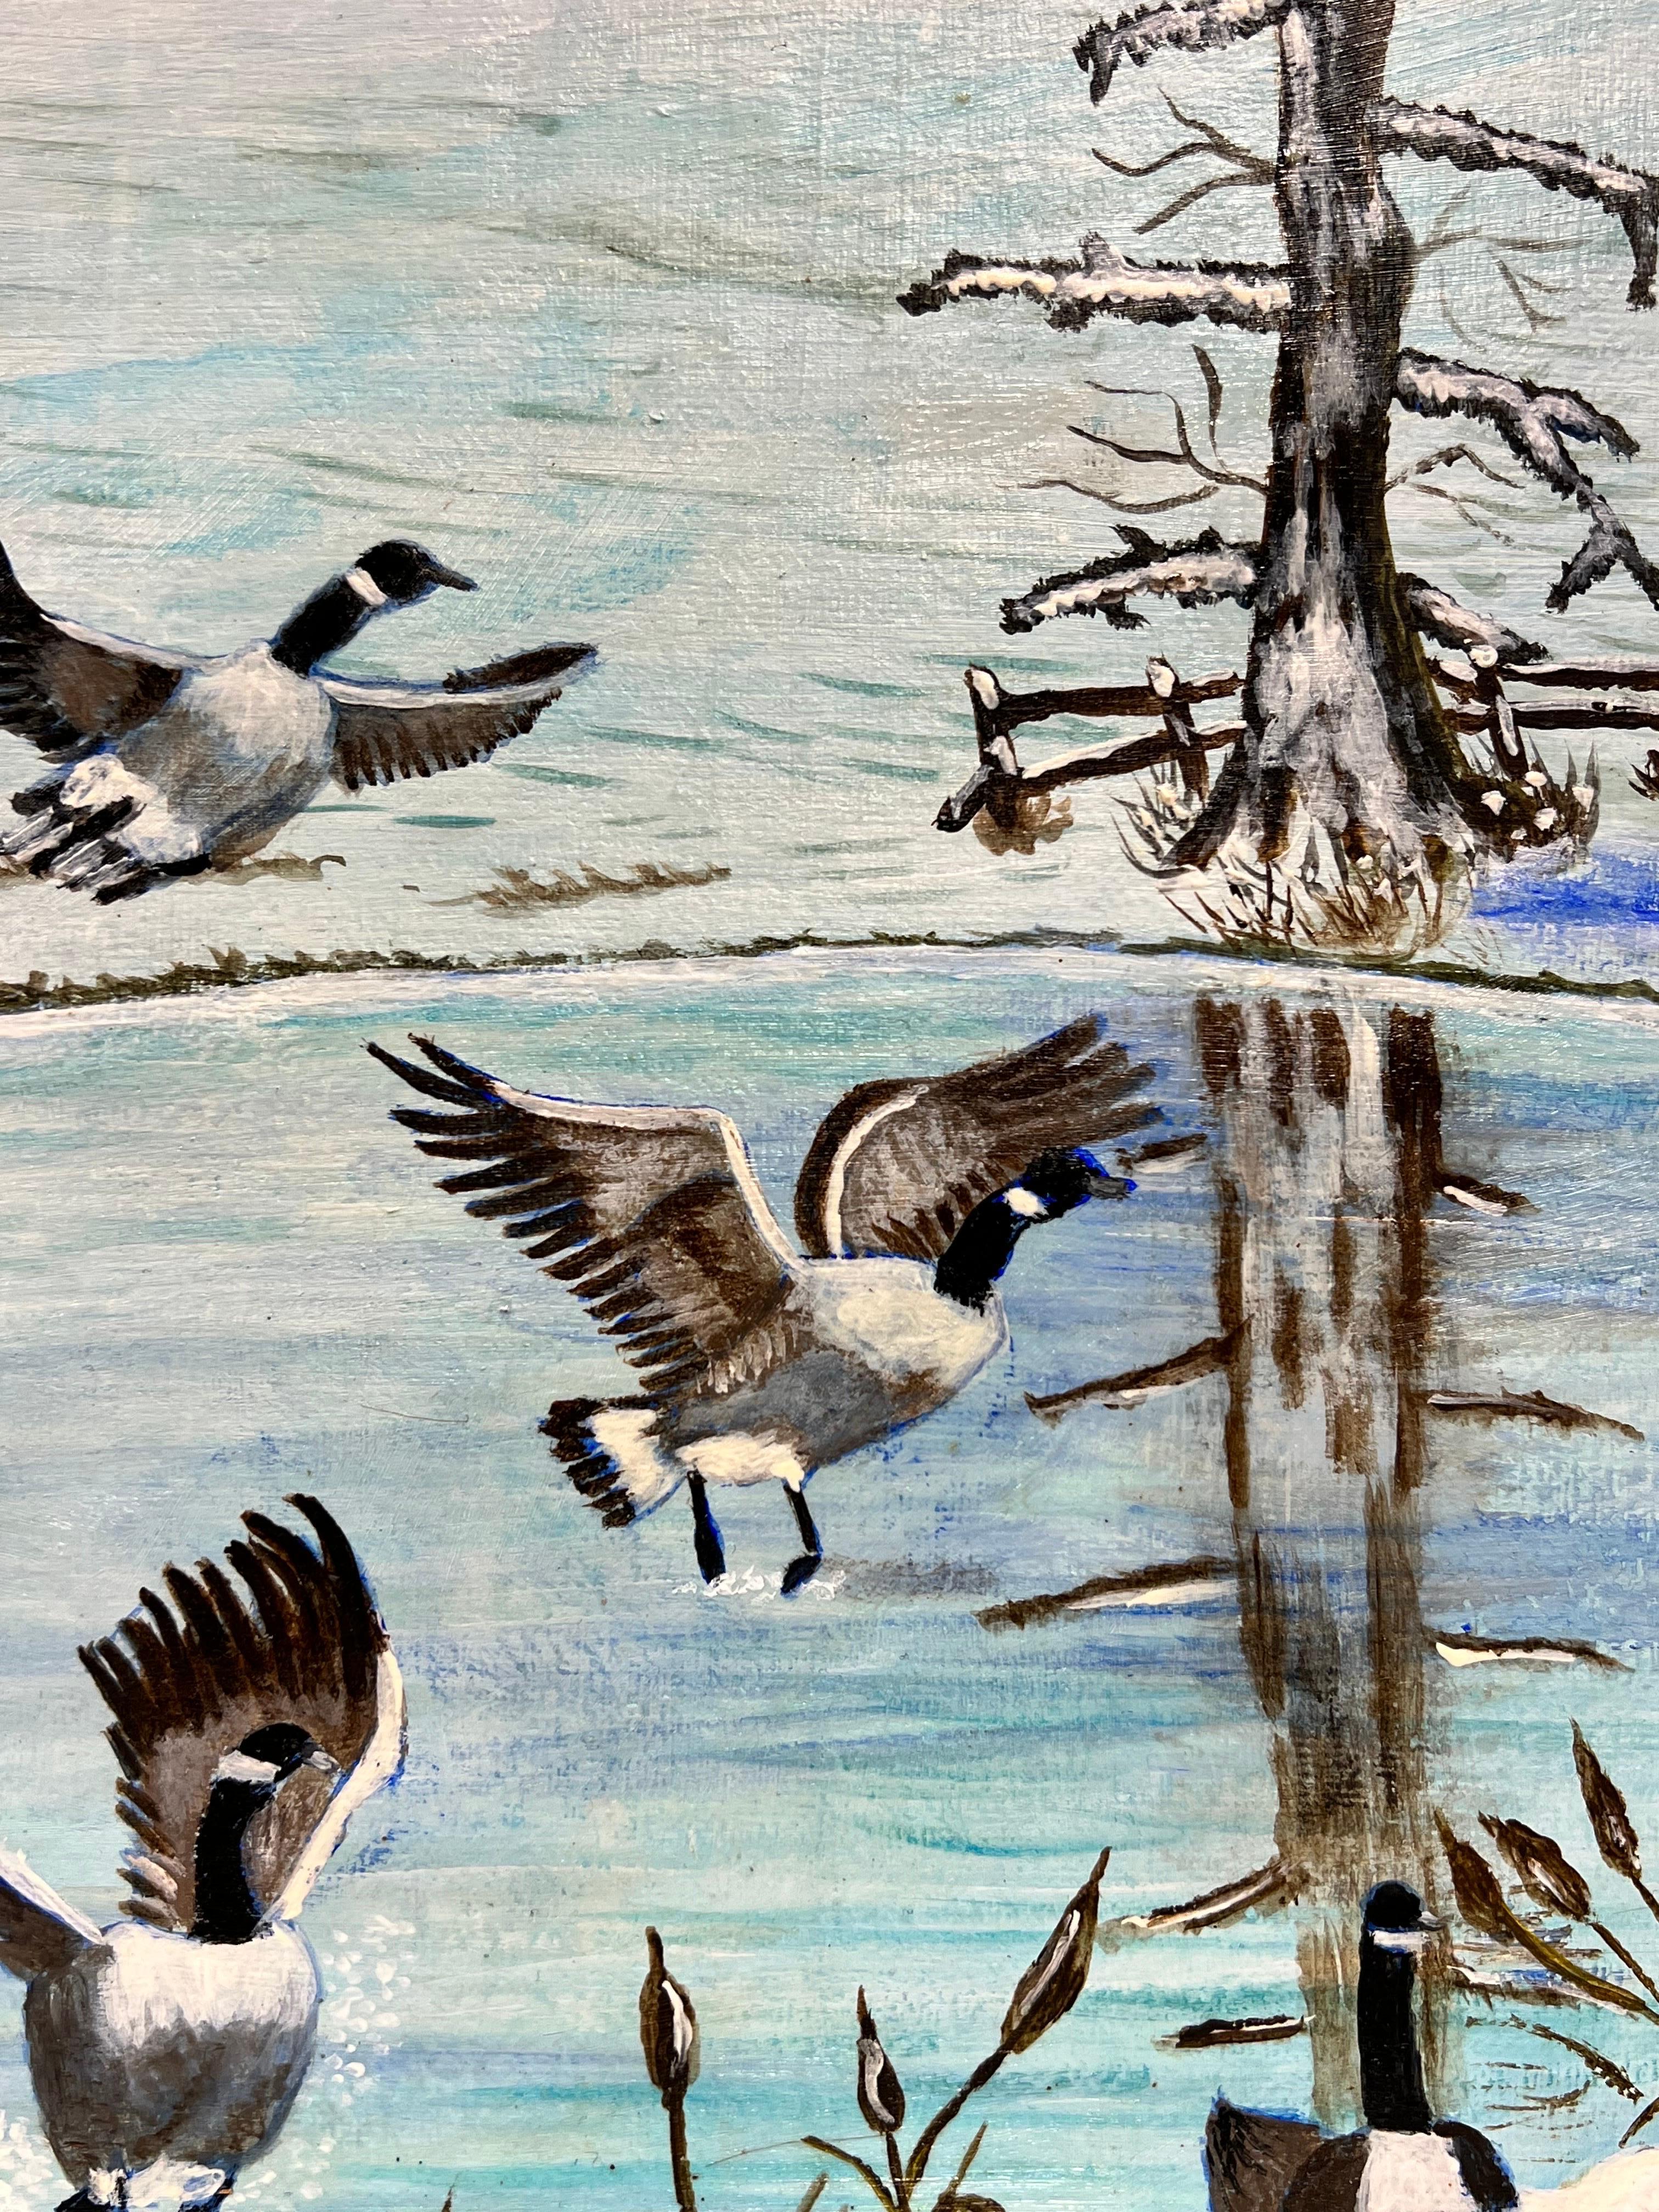 British Modern Oil Painting Geese in Winter Landscape on Frozen Lake For Sale 2